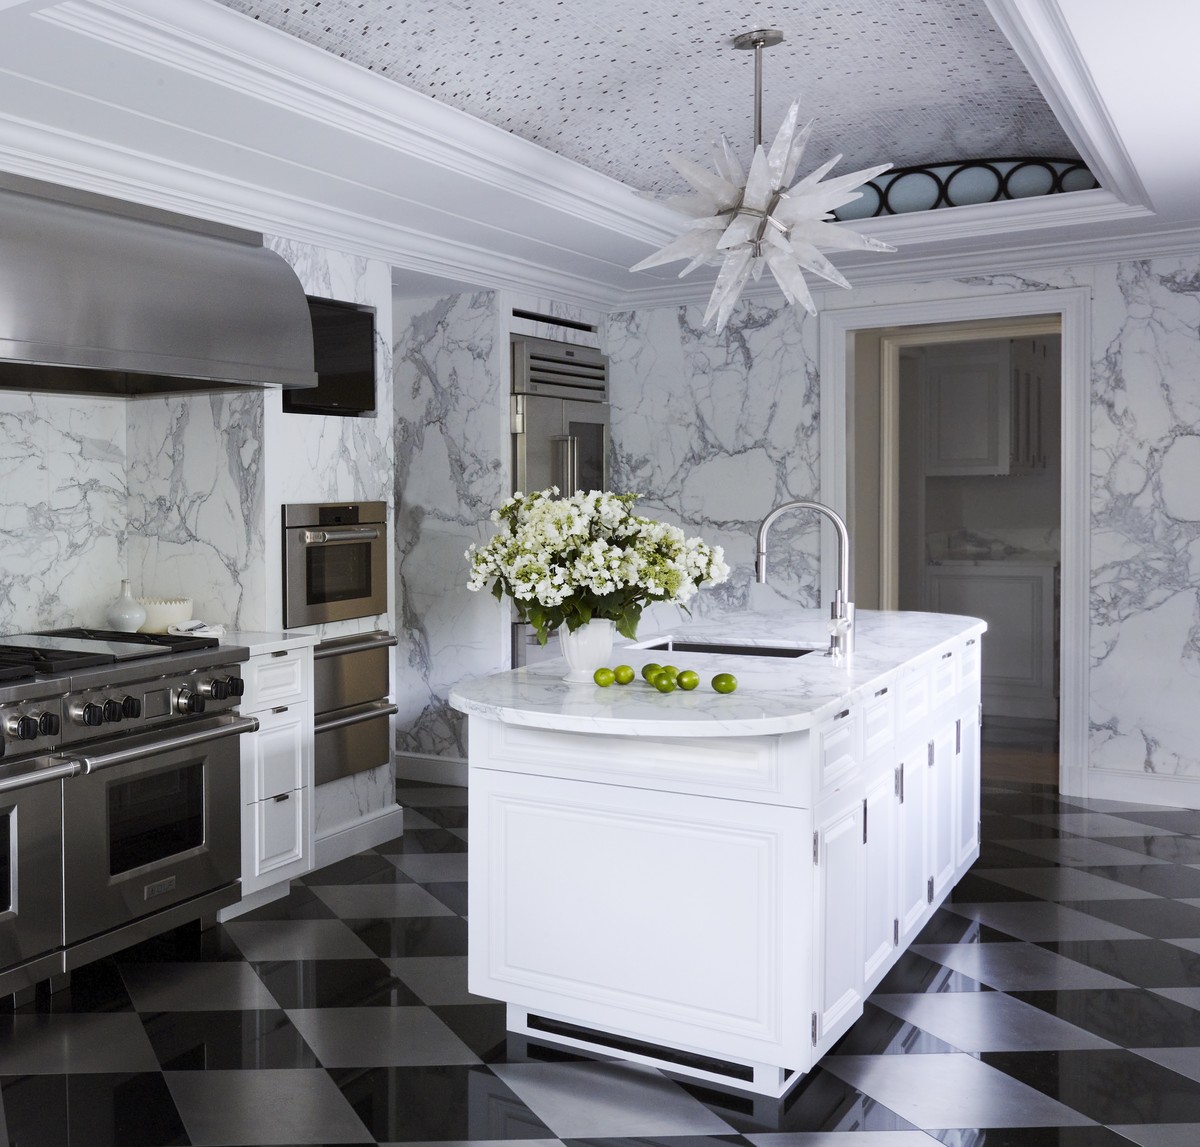 Kitchen of 1938 Ann Rutherford house in Beverly Hills with Calacatta marble walls